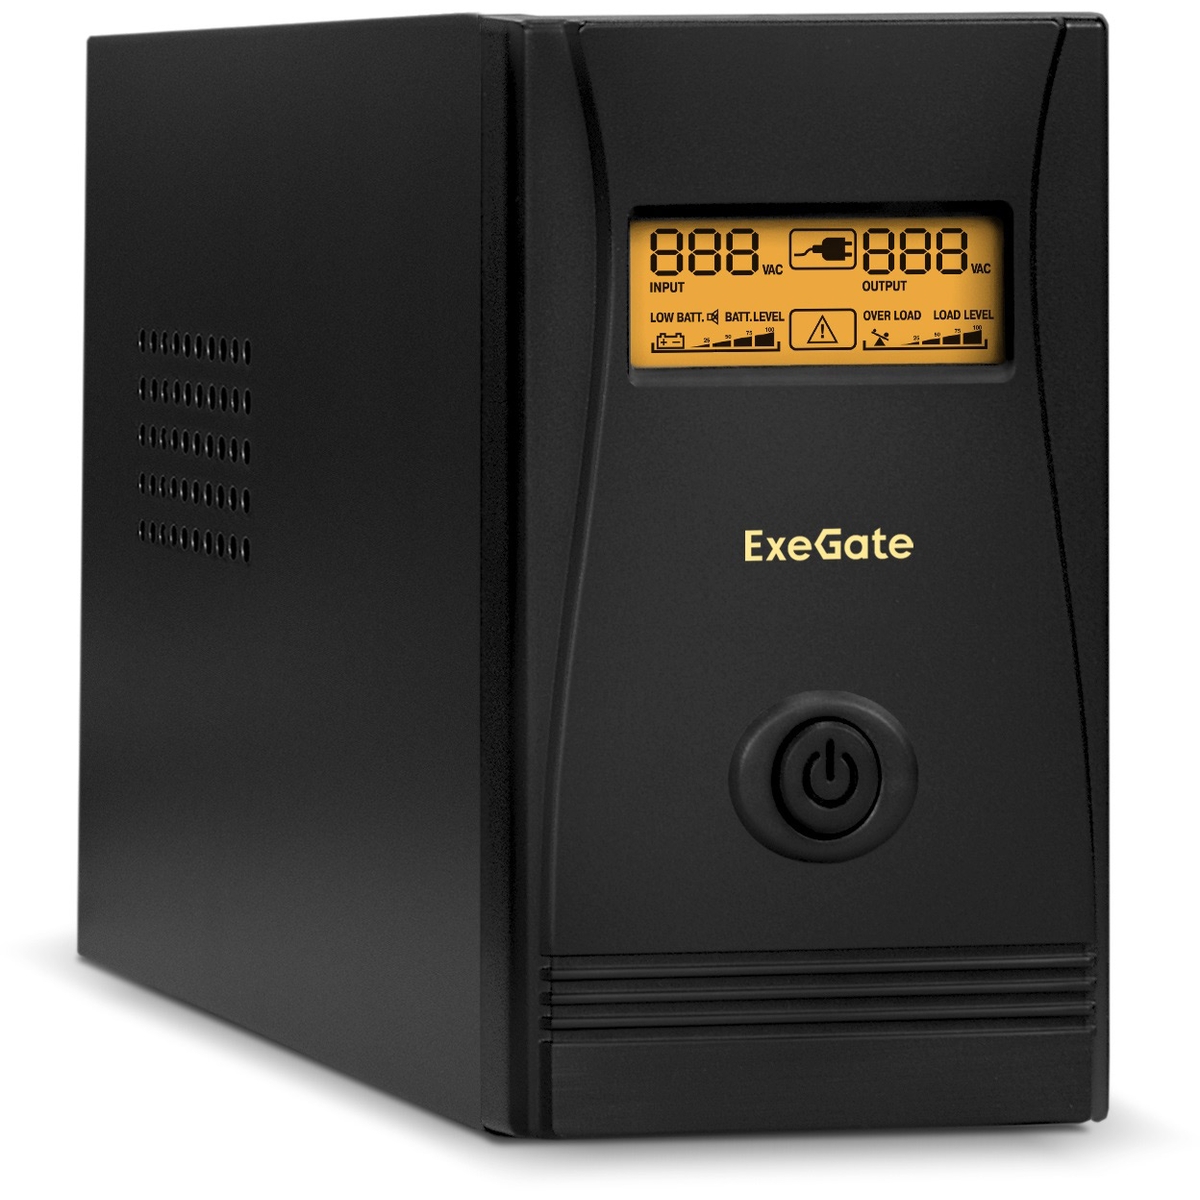 UPS ExeGate SpecialPro Smart LLB-500.LCD.AVR.4C13